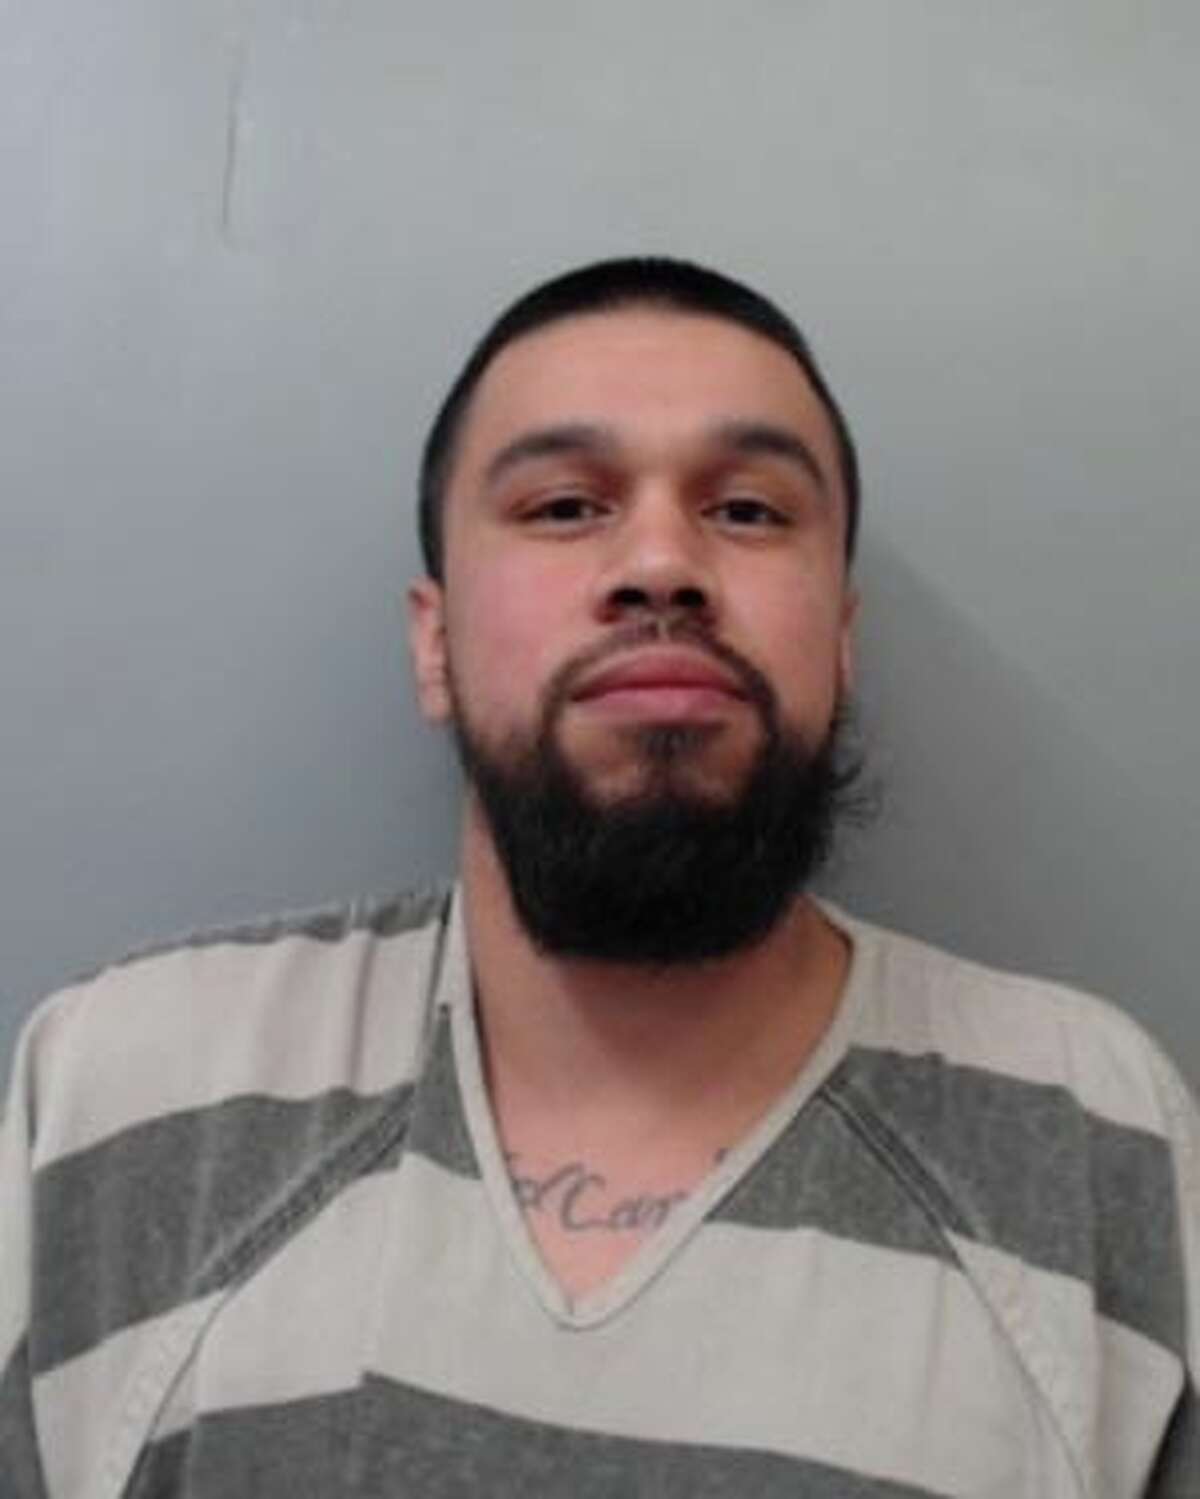 Jorge Luis Garza, 26, was charged with assault.